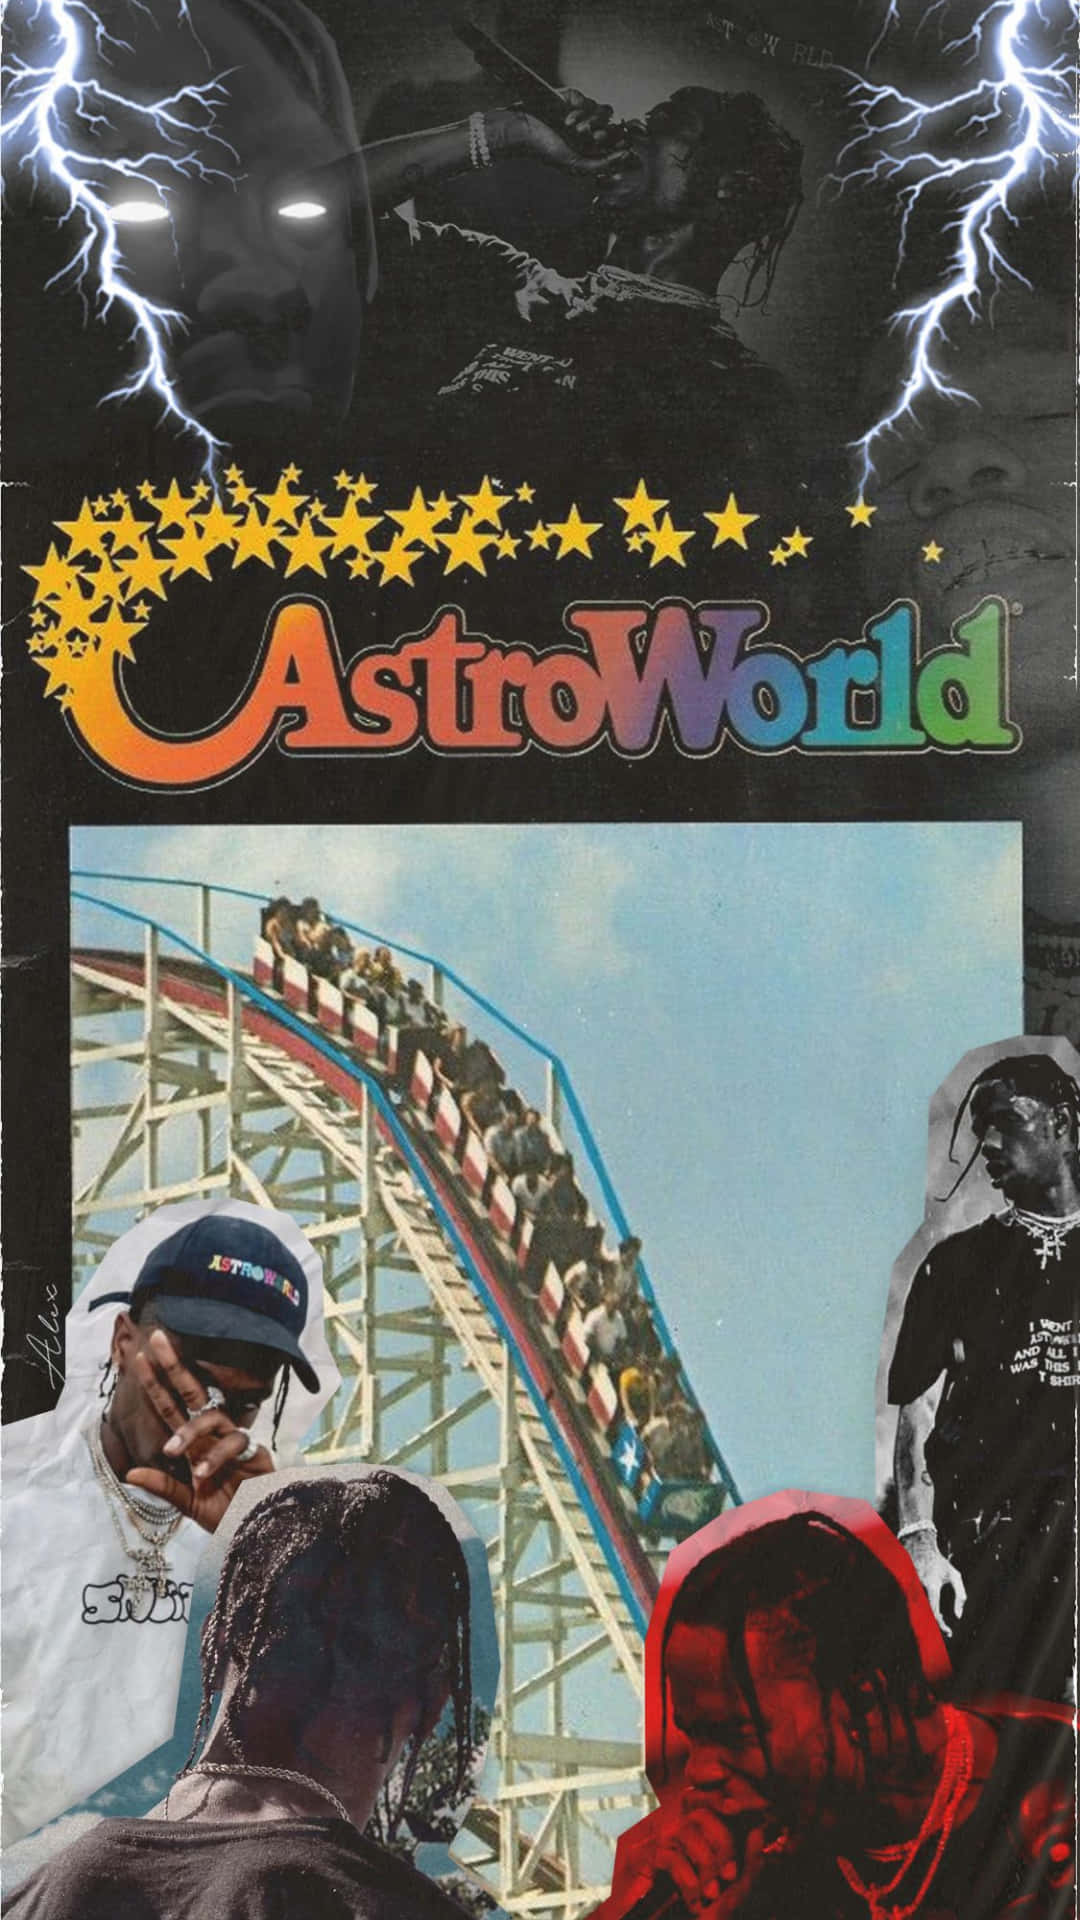 Welcome to the Astroworld!